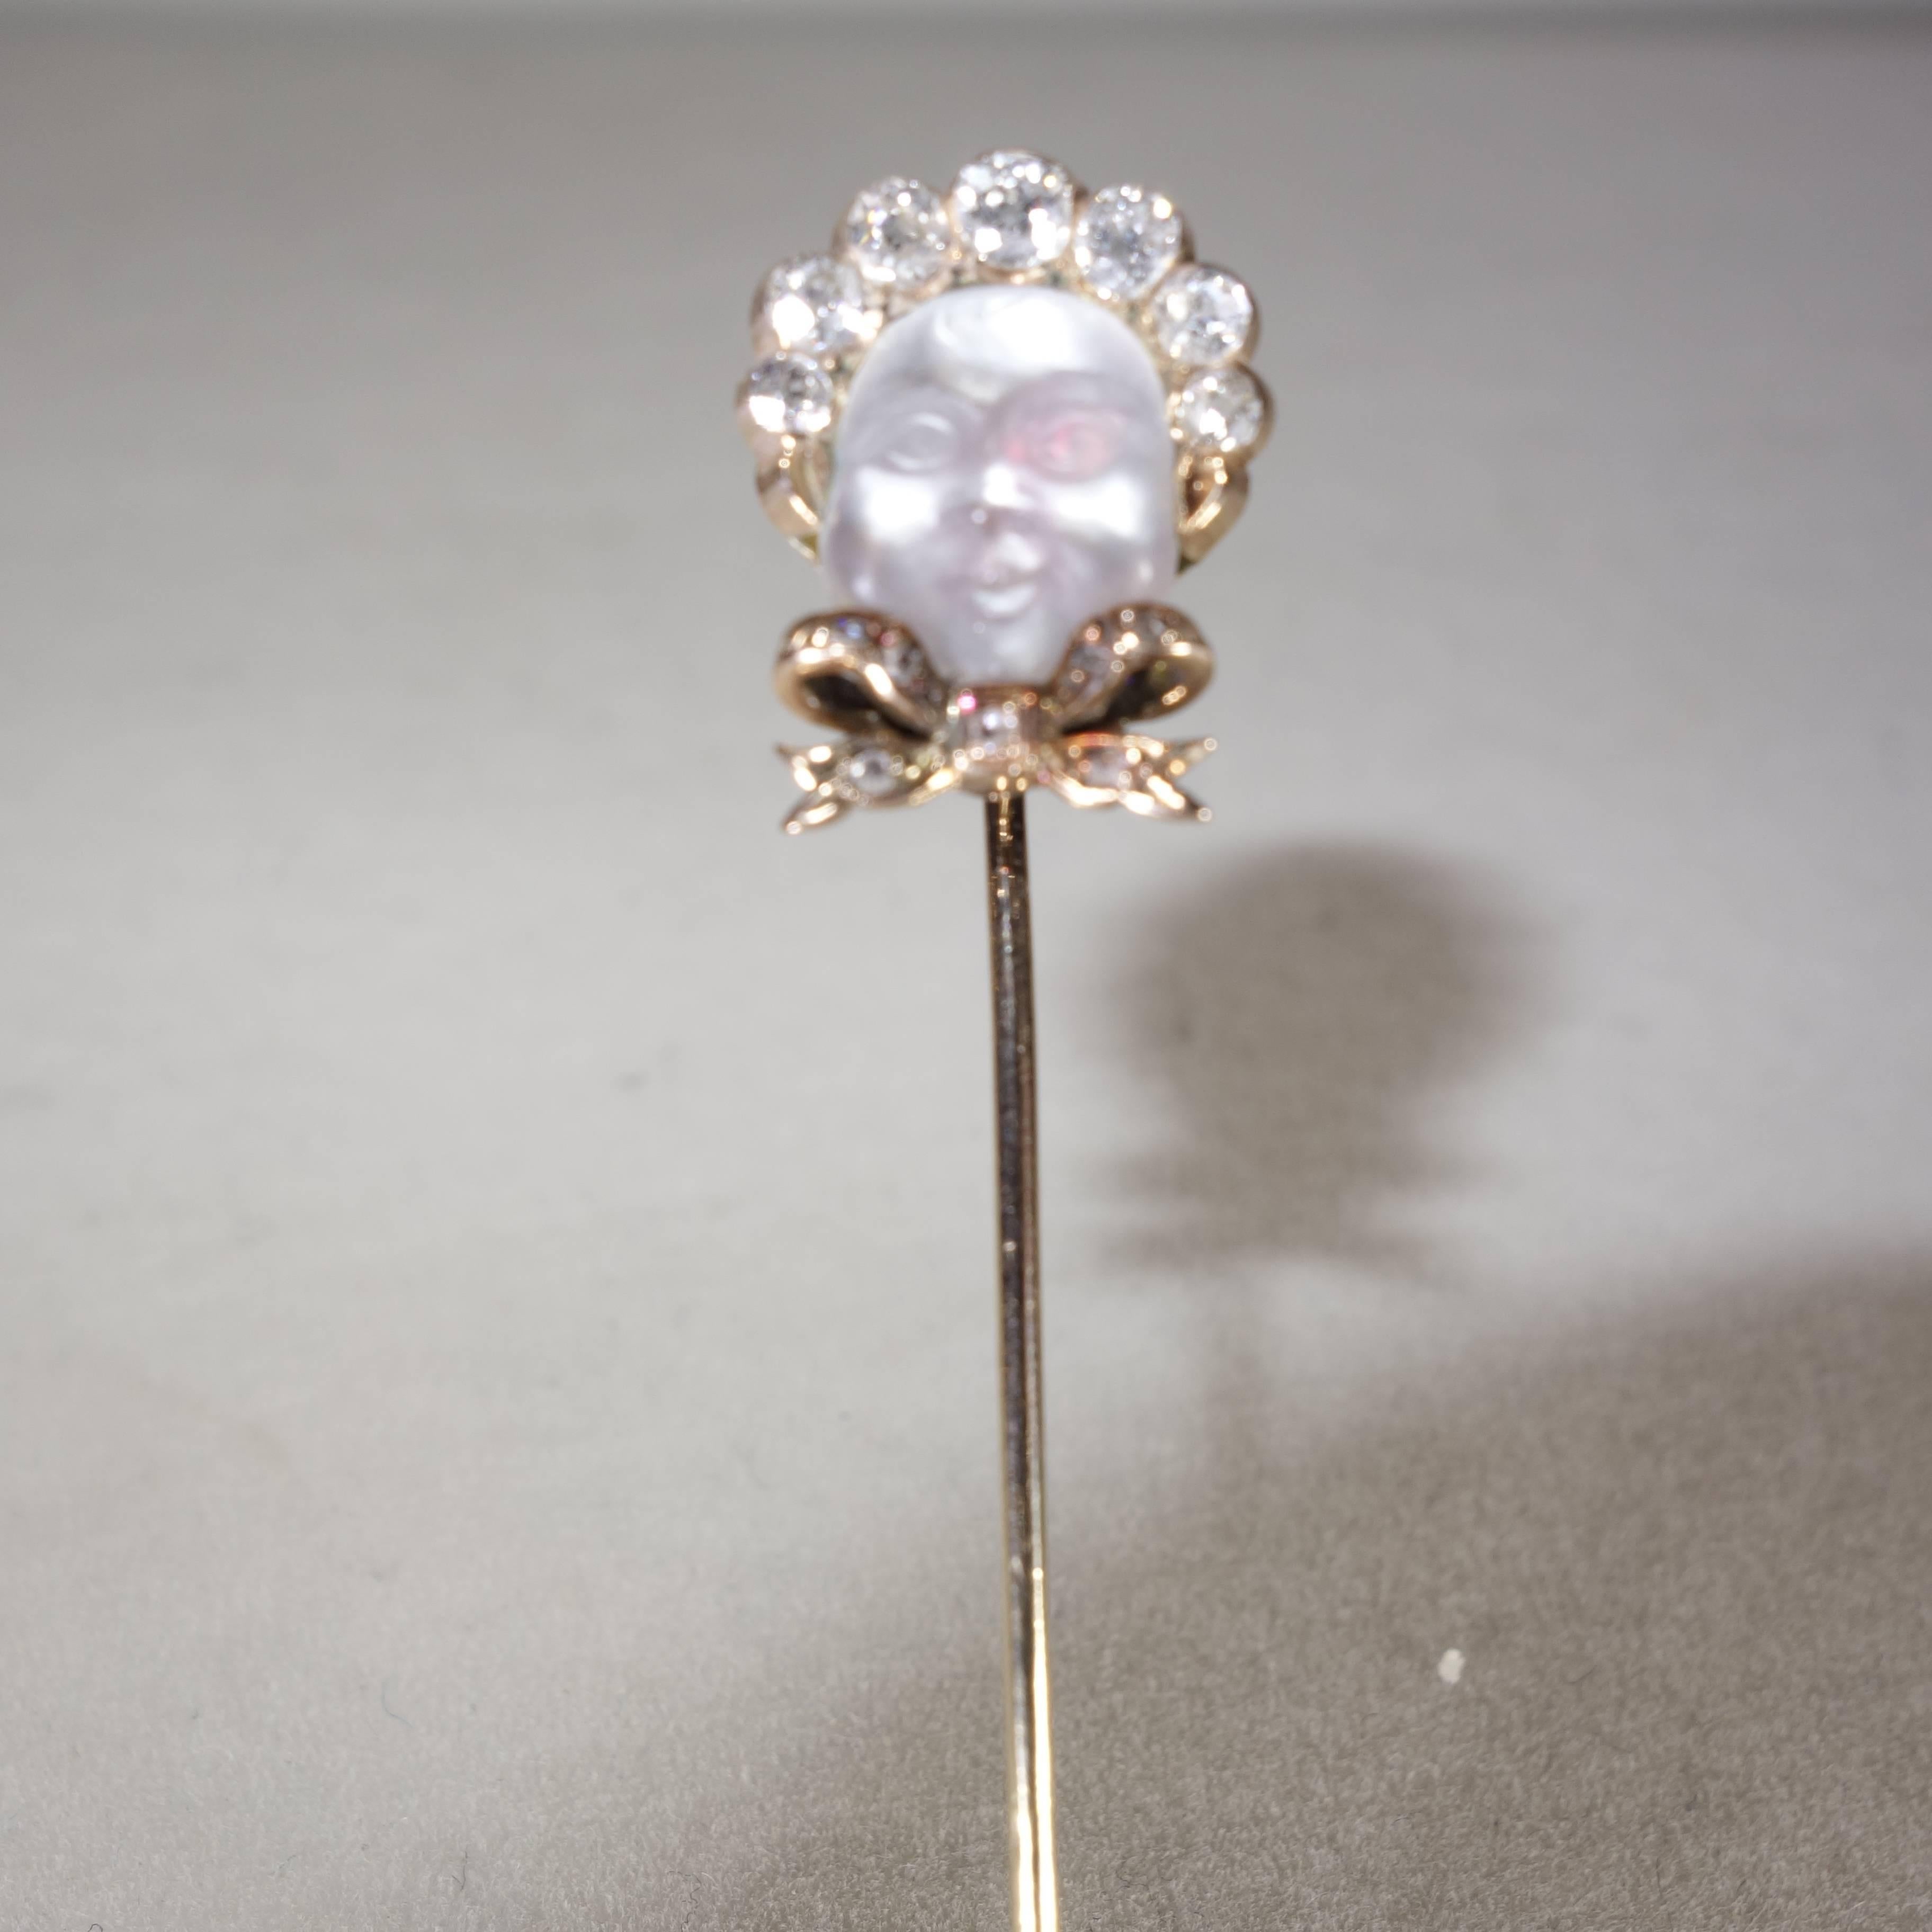 Uncommon collector's antique stick pin.  Detail carving in Burmese moonstone of a baby with a diamond bonnet with 7 graduated mine cut diamonds and 7 rose cut diamonds, 15.3 high by 12.2 mm wide.  The stick pin is 65 mm long (2.56 inches).